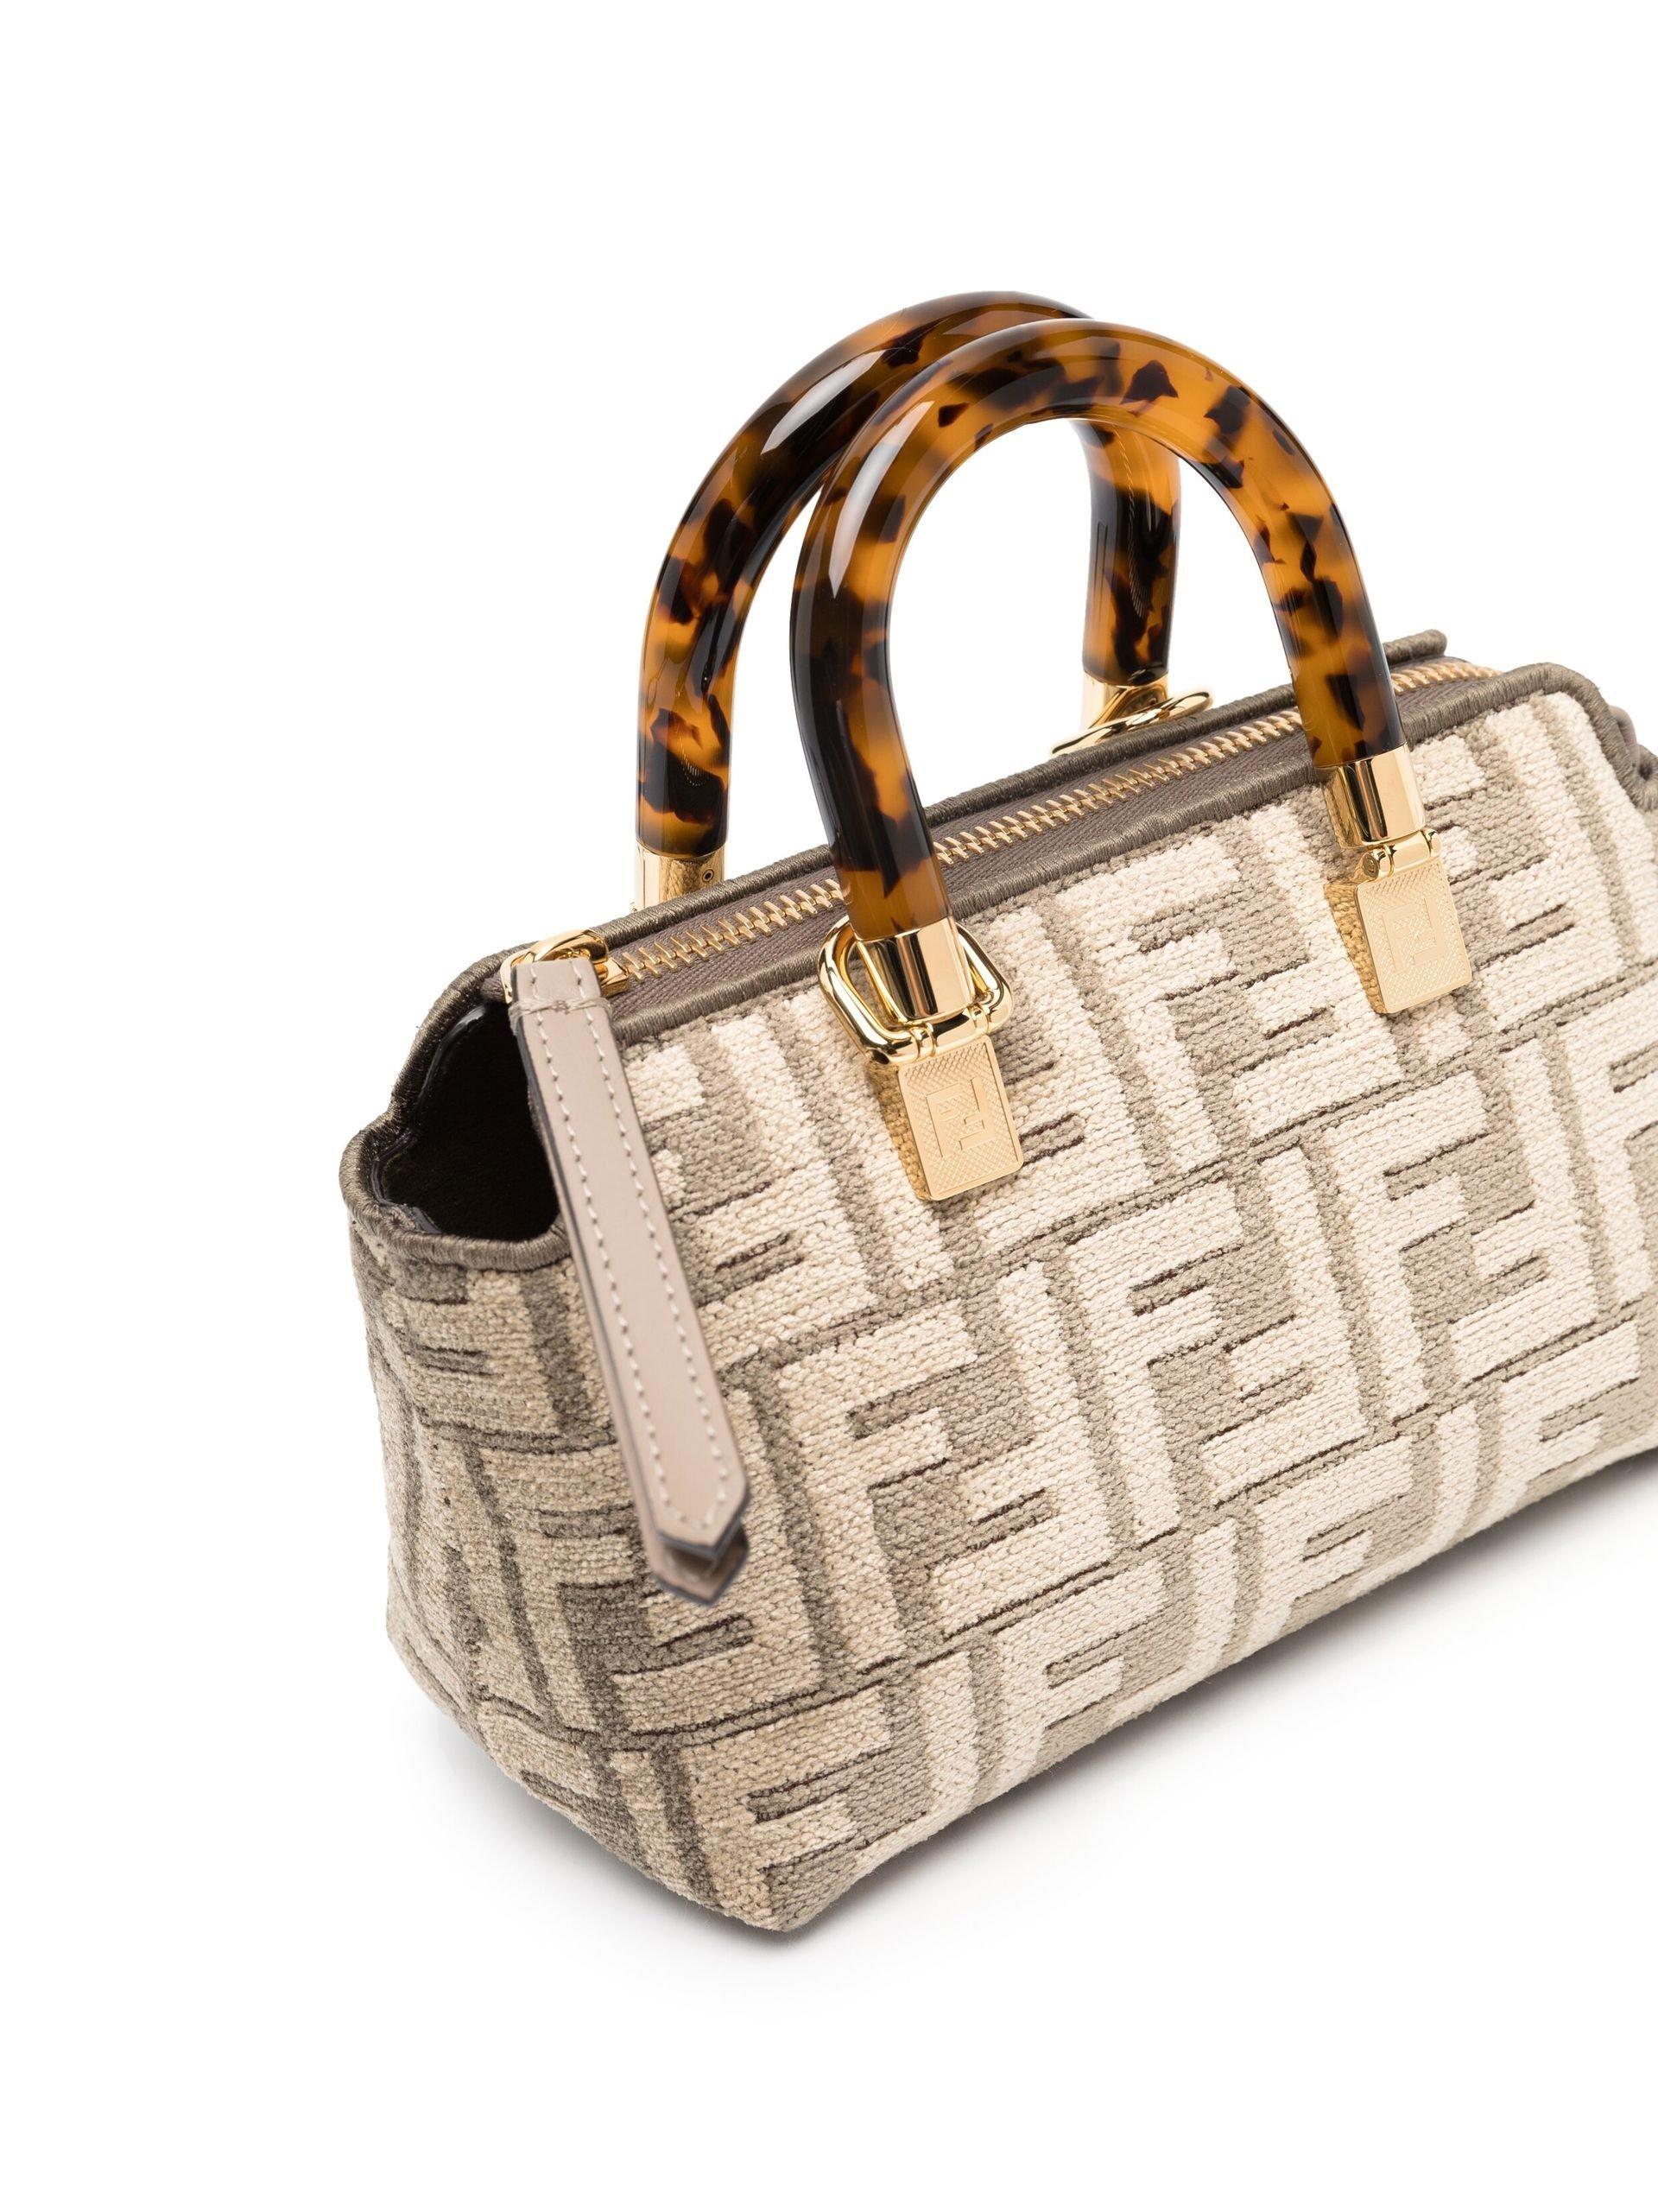 By The Way Boston Mini Bag FENDI : The art of Expression is a must